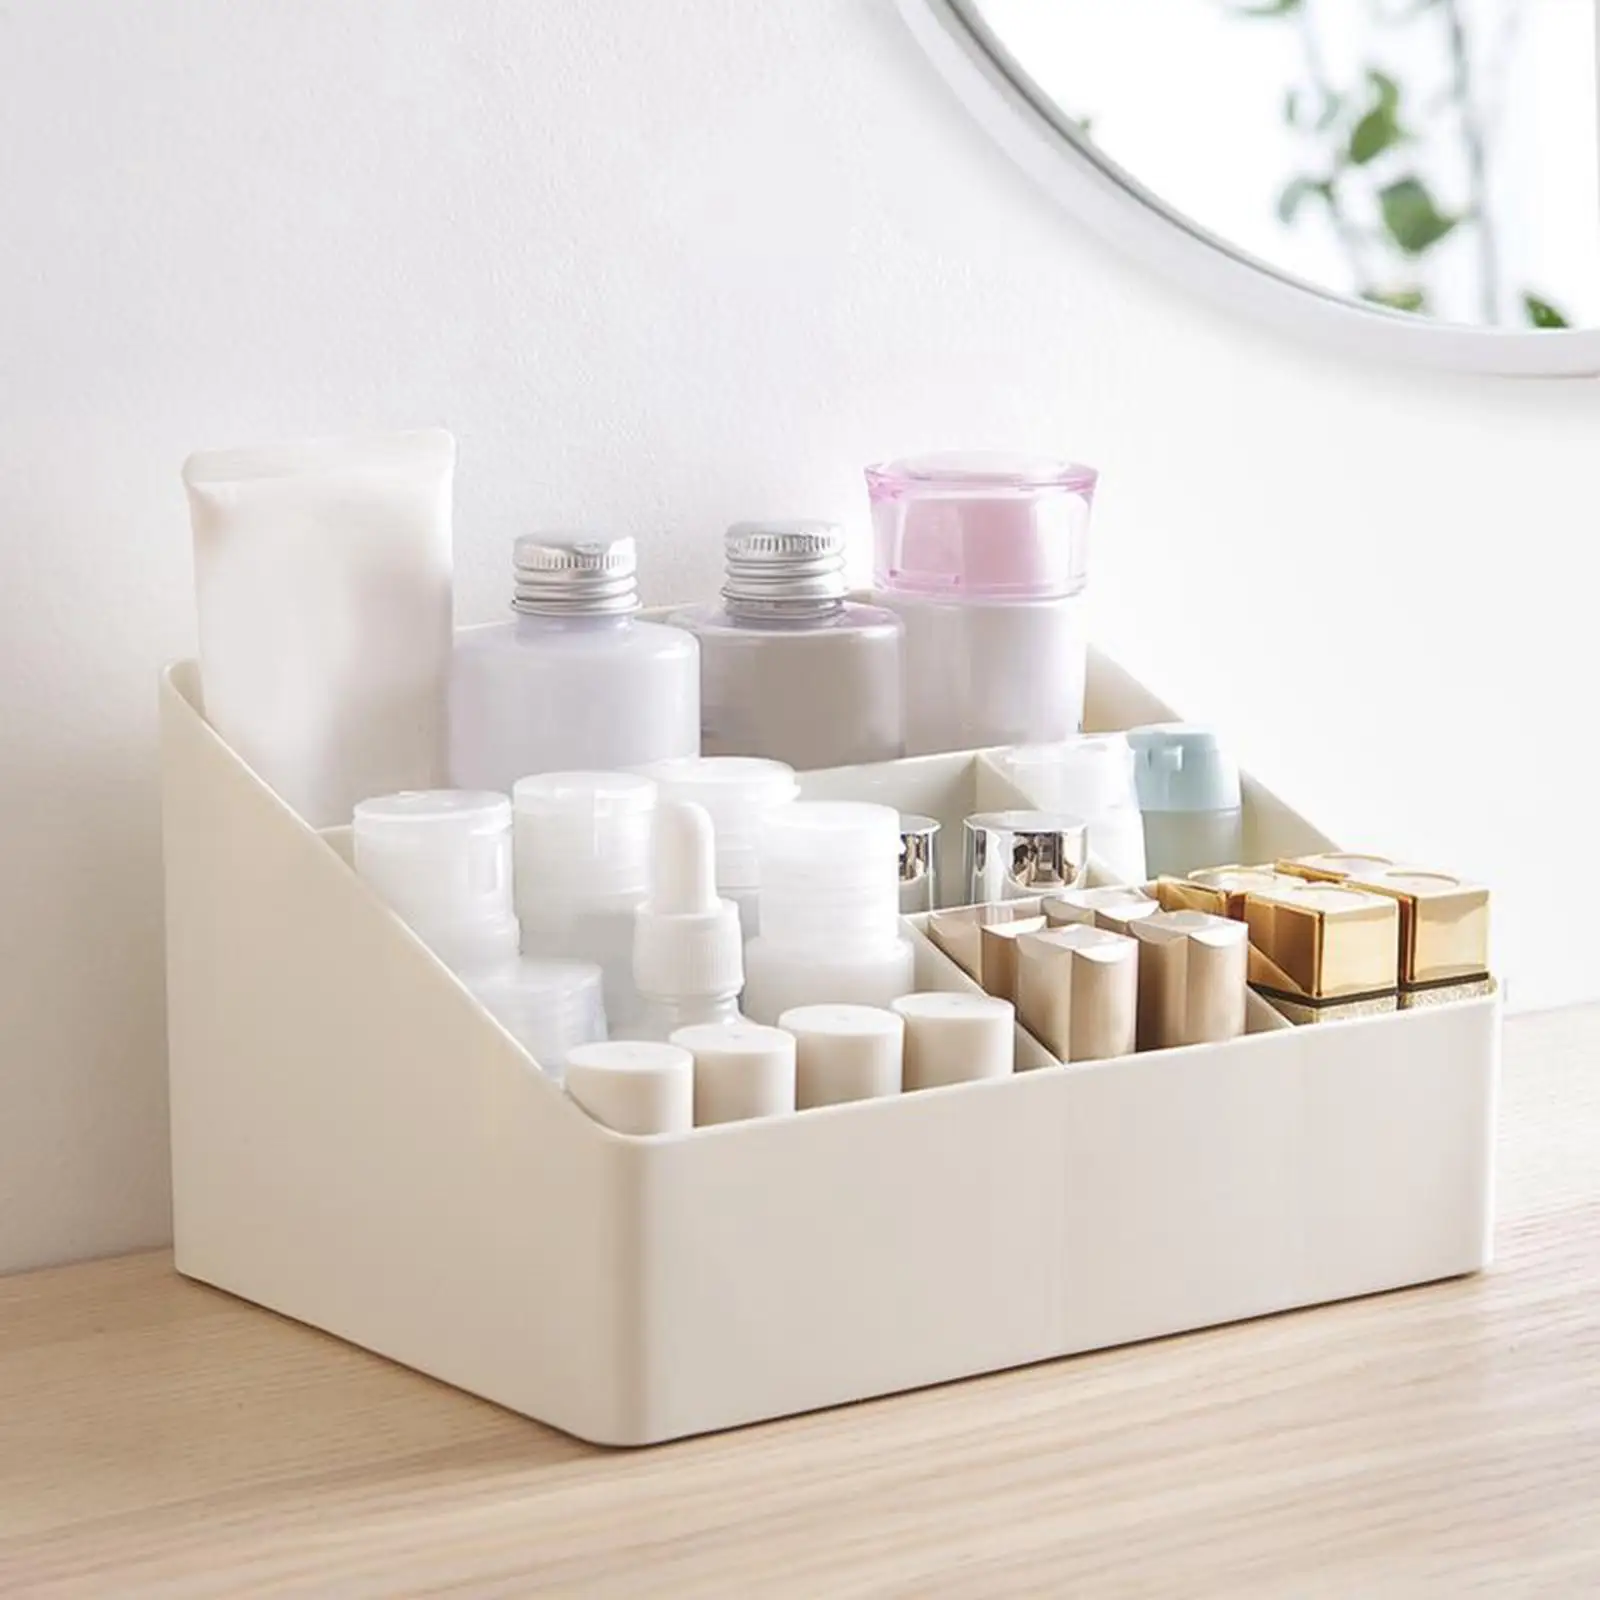 Cosmetic Storage Box Skin Care Shelf Multi Function Large Capacity Makeup Desk Organizer Container for Bathroom Home Nail Polish